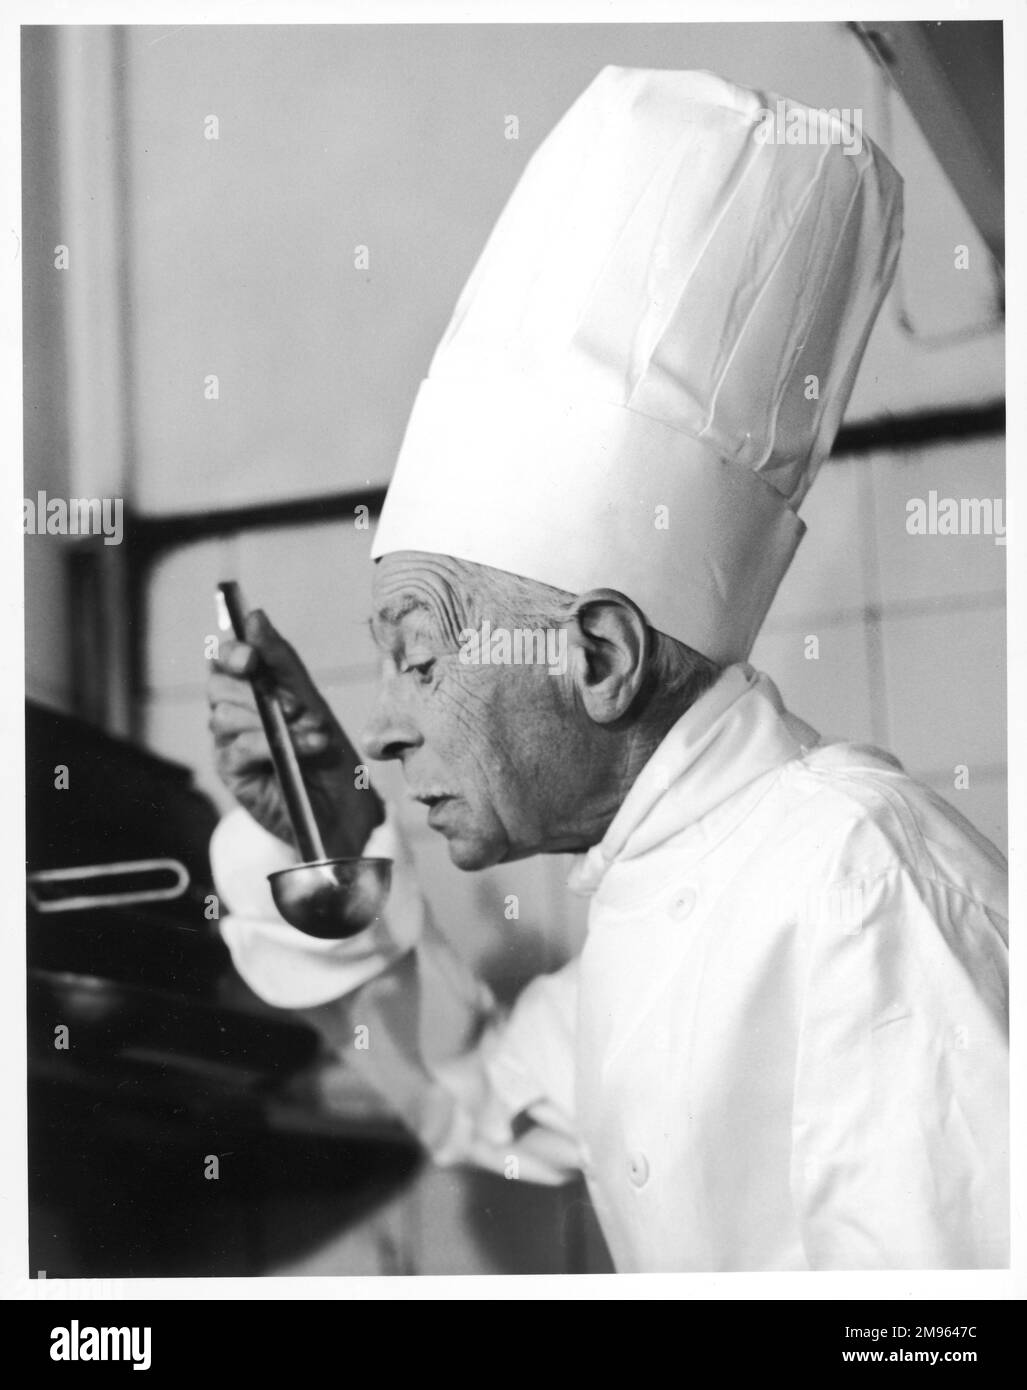 A chef in a chef's hat tastes some soup or other food from a ladle. Stock Photo